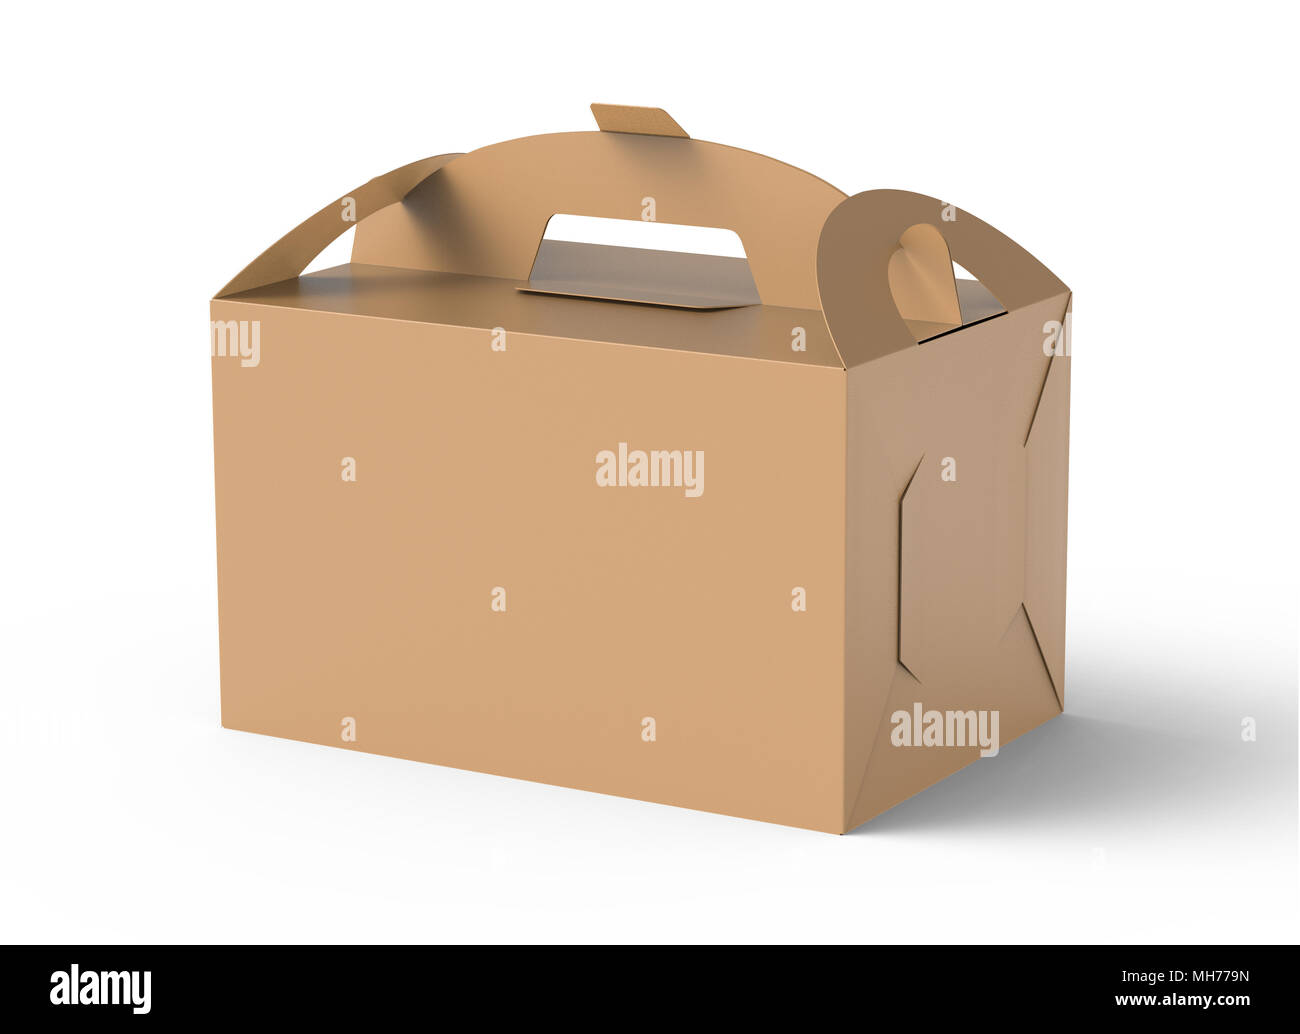 Kraft box with handle, gift or food carton package in 3d render for design uses Stock Photo